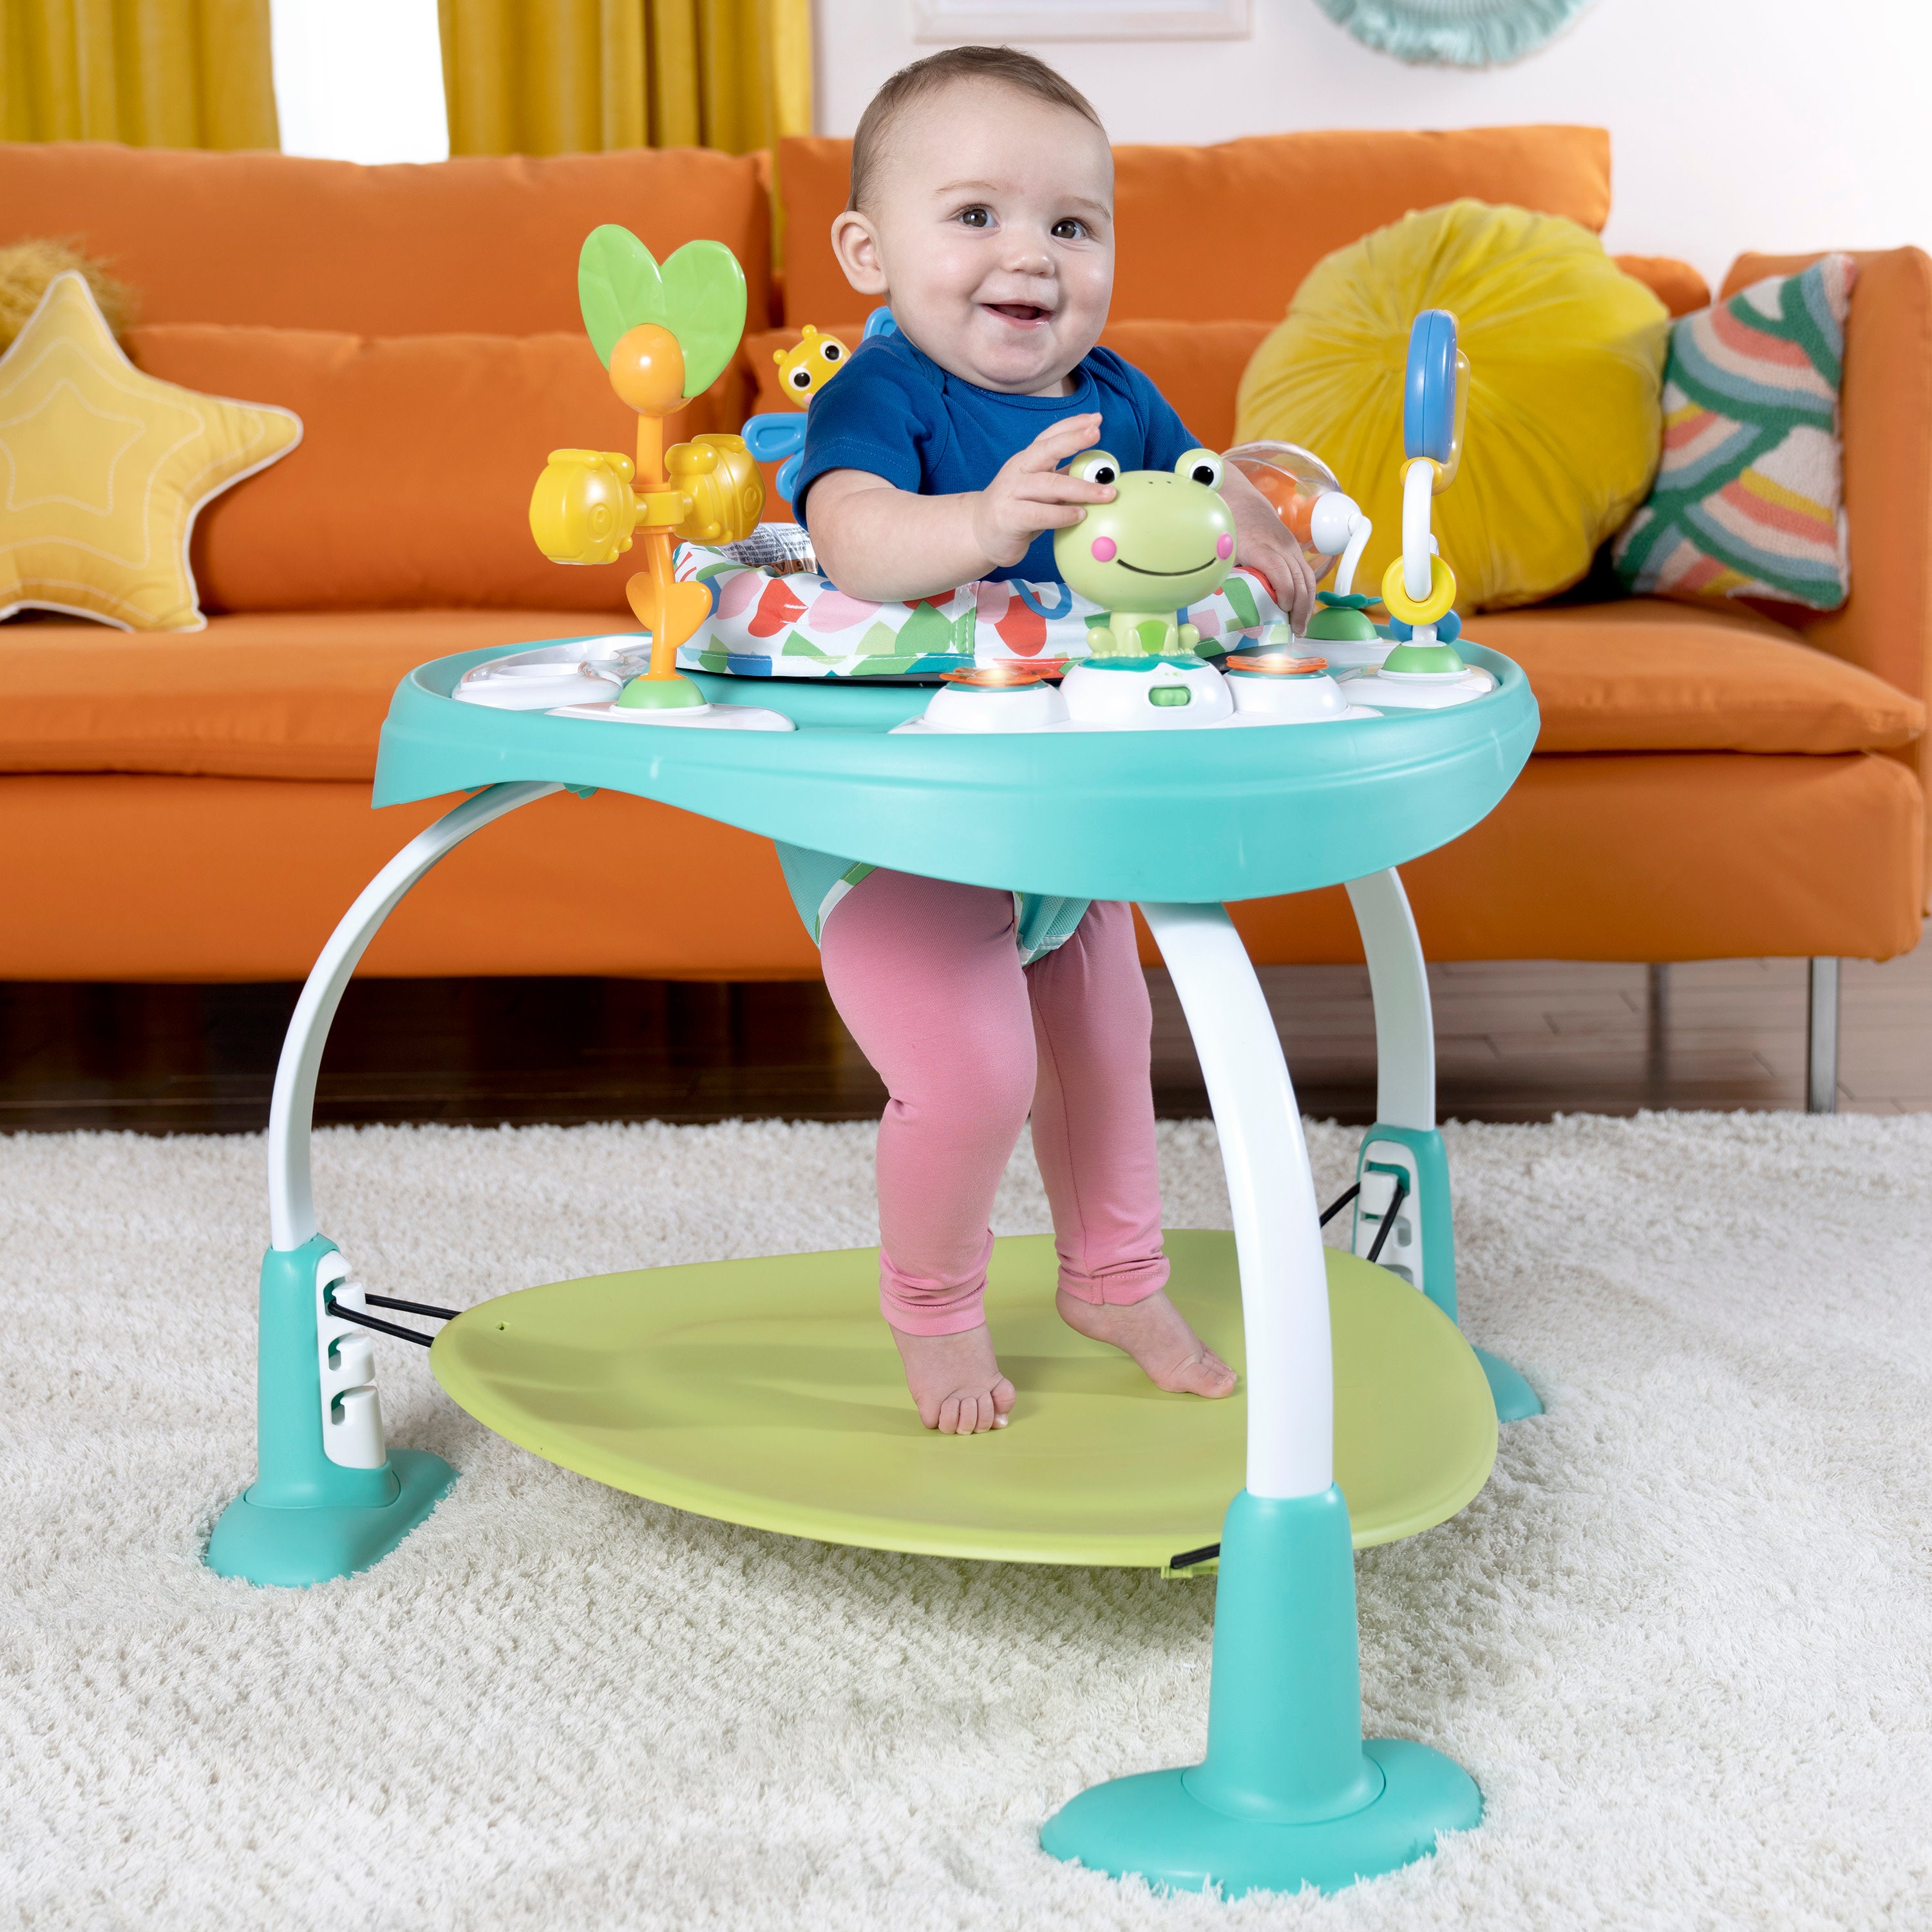 Fisher price A 2 In 1 Exciting Baby Entertainer And Play Table From With  Music Lights And Sounds That Grows With Your Baby From Infant To Toddler  Multicolor